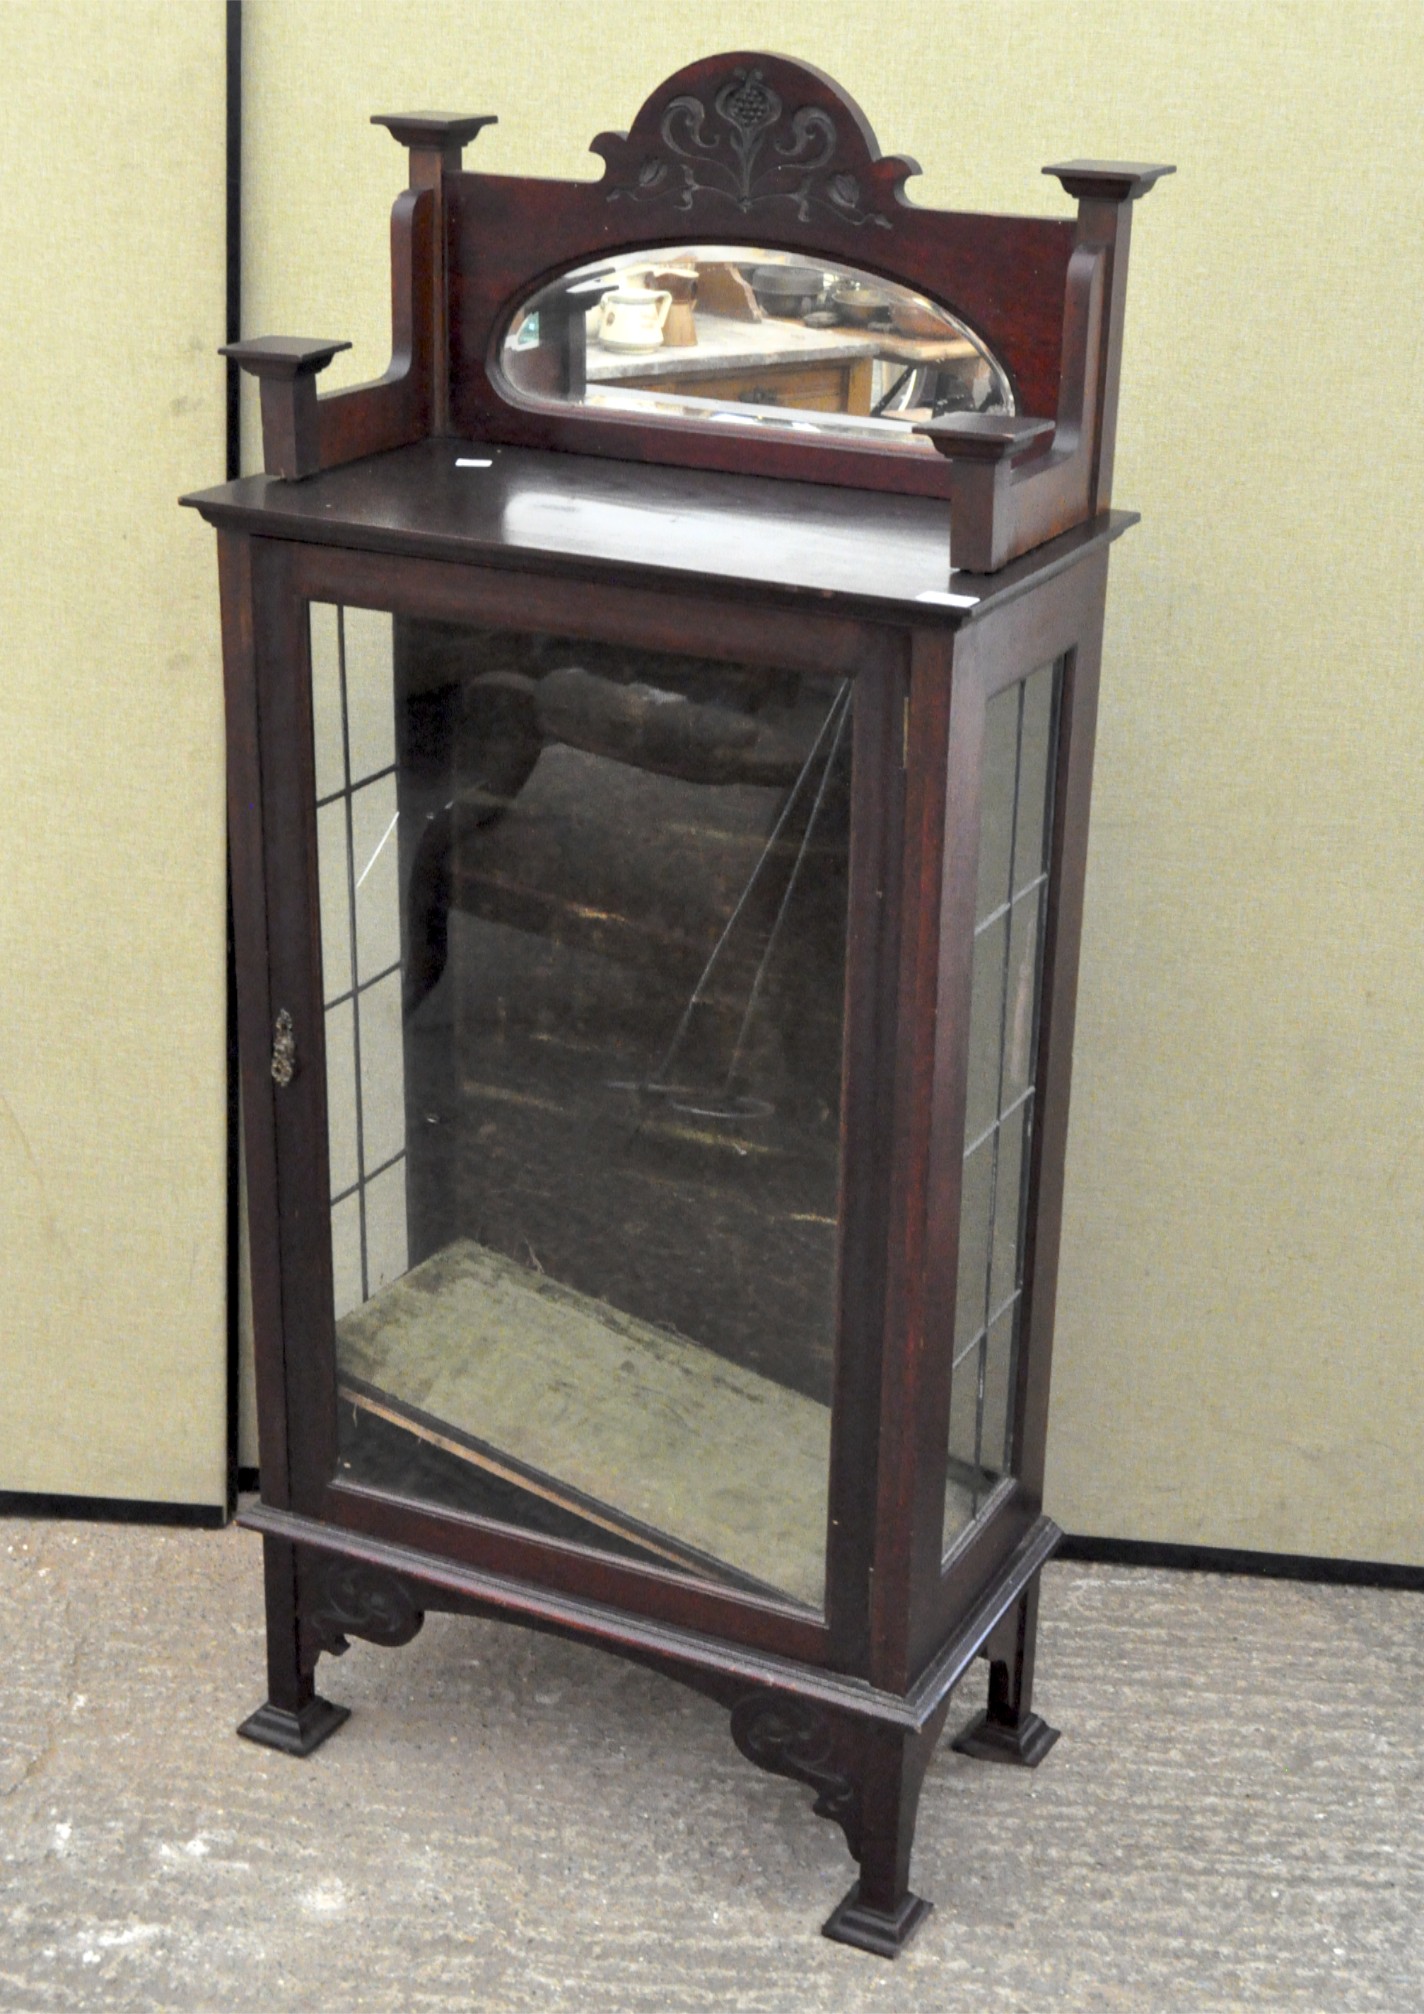 A late 19th/early 20th century mahogany display cabinet, glazed front and sides, with two shelves,